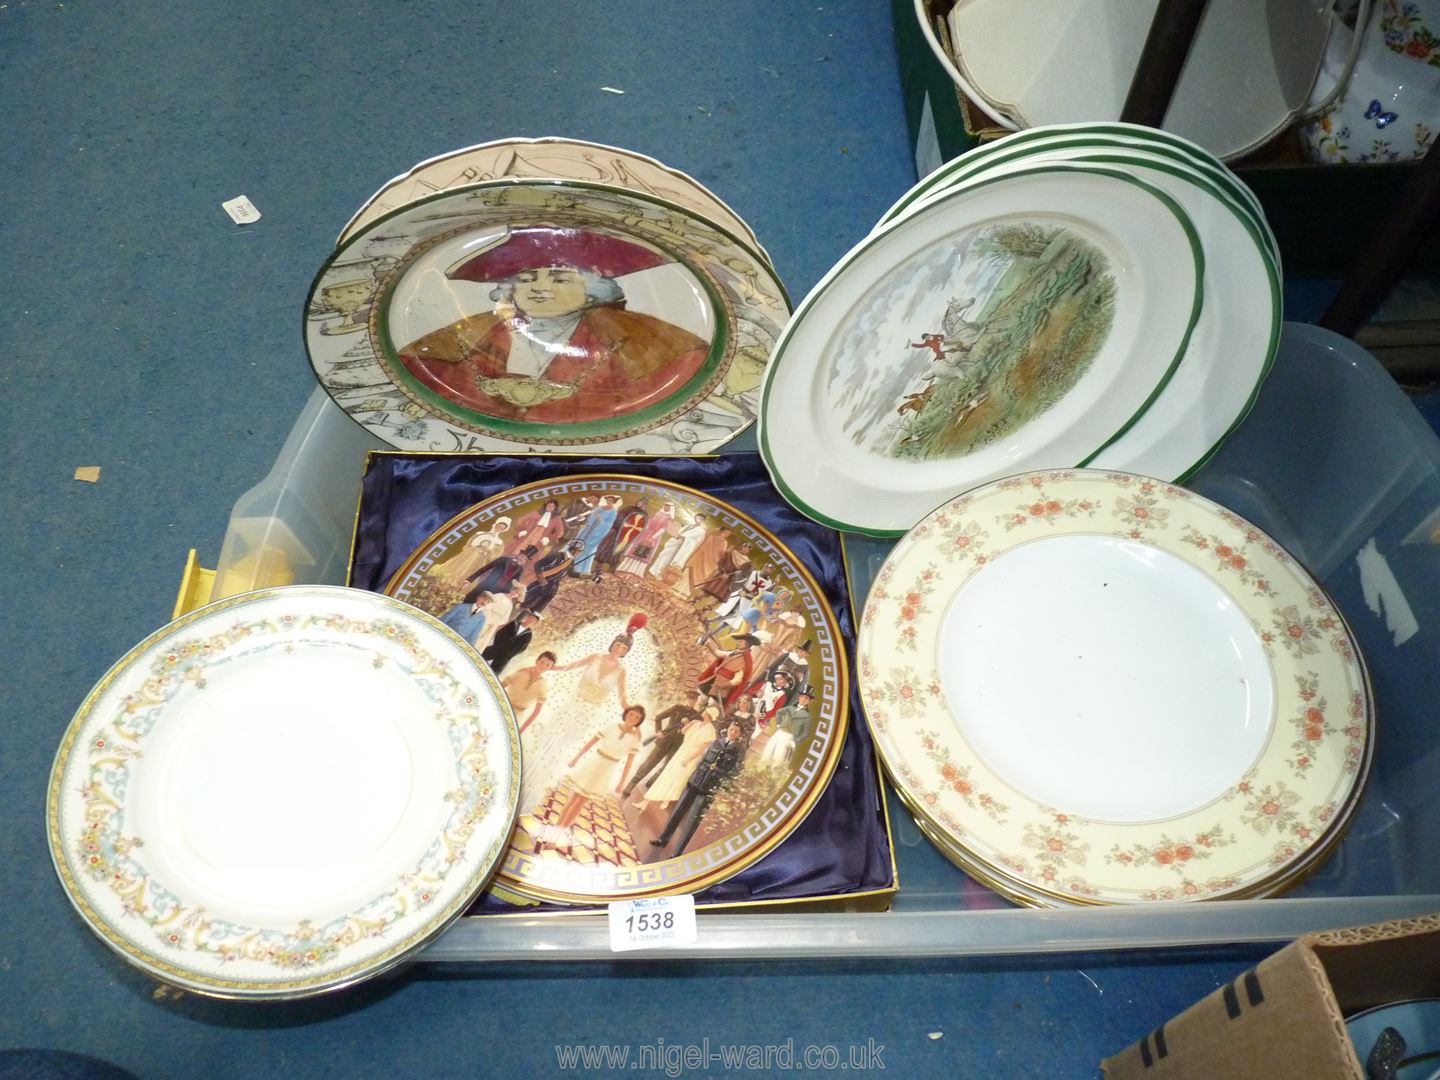 A quantity of plates including 'the Hunting Man' and 'the Mayor' plates by Royal Doulton,